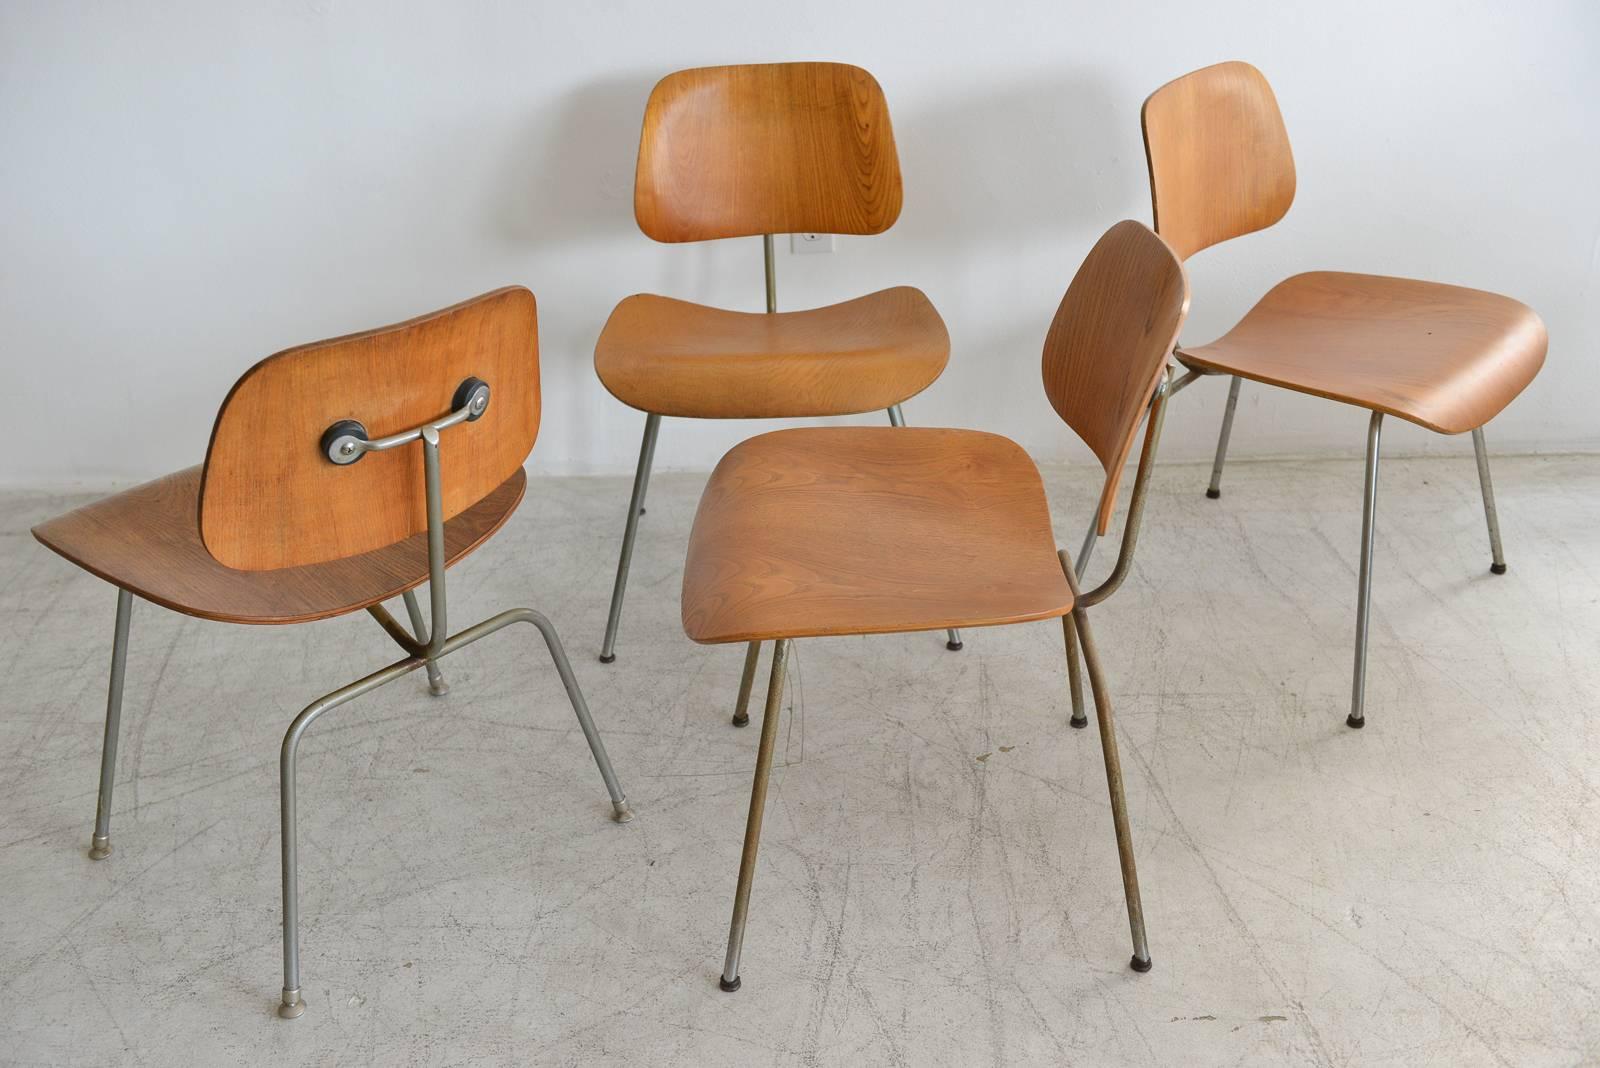 Set of four Charles Eames DCM dining chairs. Two have original early first edition labels, one is unmarked and the other has older foil label. Original shock mounts in good condition, frames have patina. Wood is in good condition, see photos for any